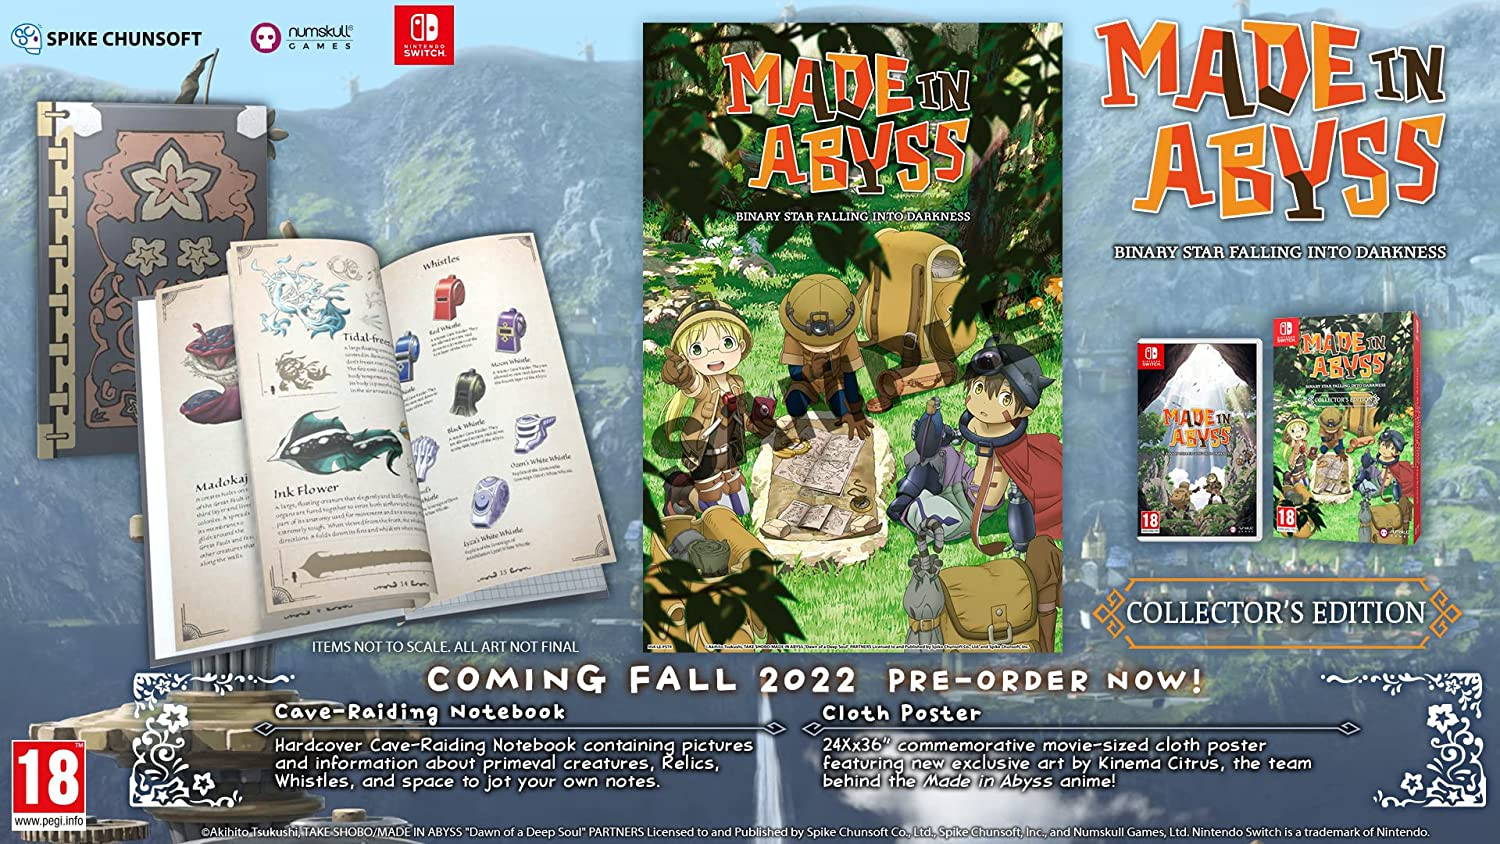 Made in Abyss Binary Star Falling Into Darkness Collector's Edition - Nintendo Switch